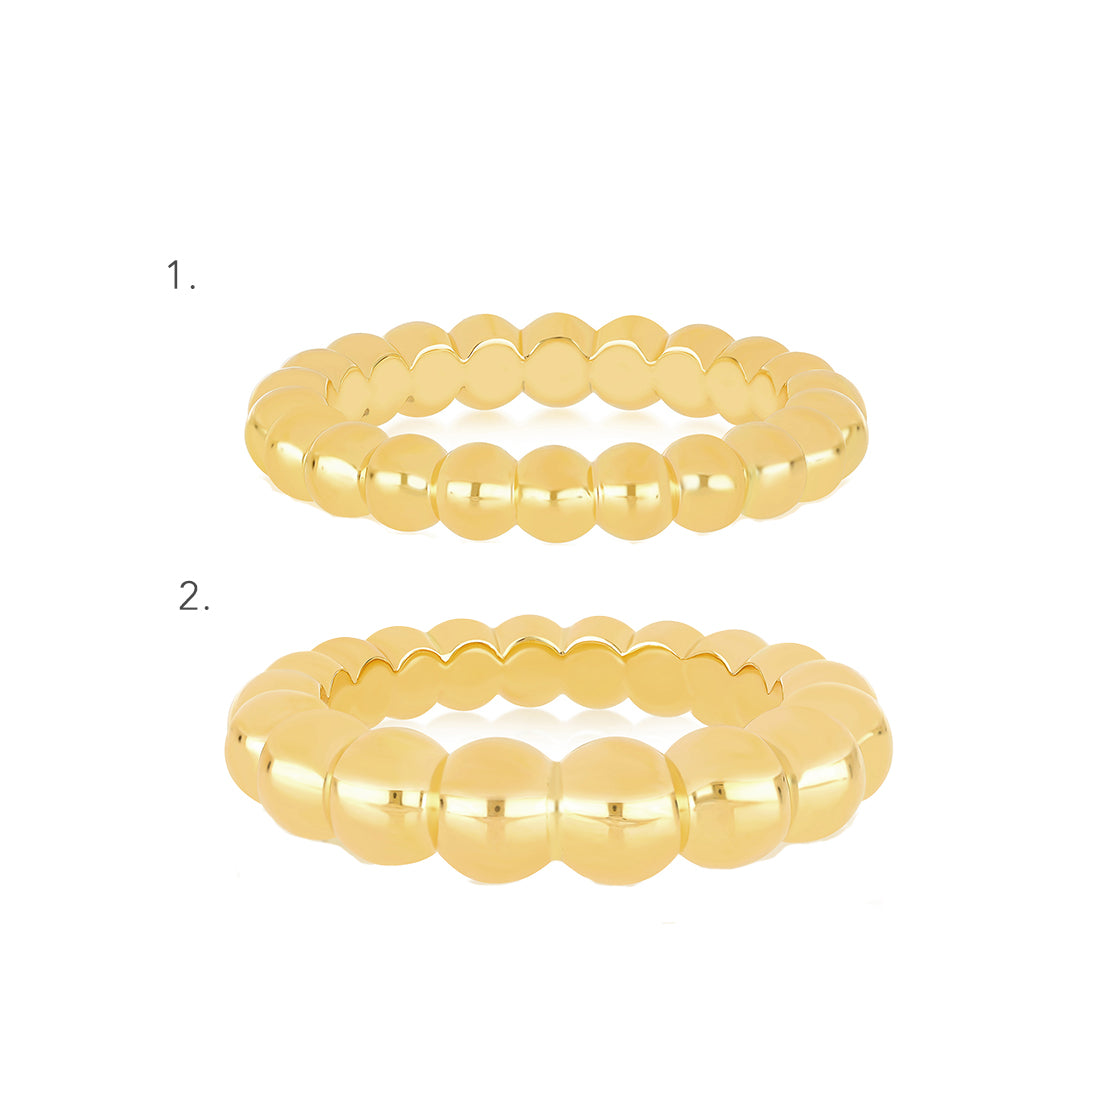 The Chic Stacker Gift Set Rings in 14k Yellow Gold